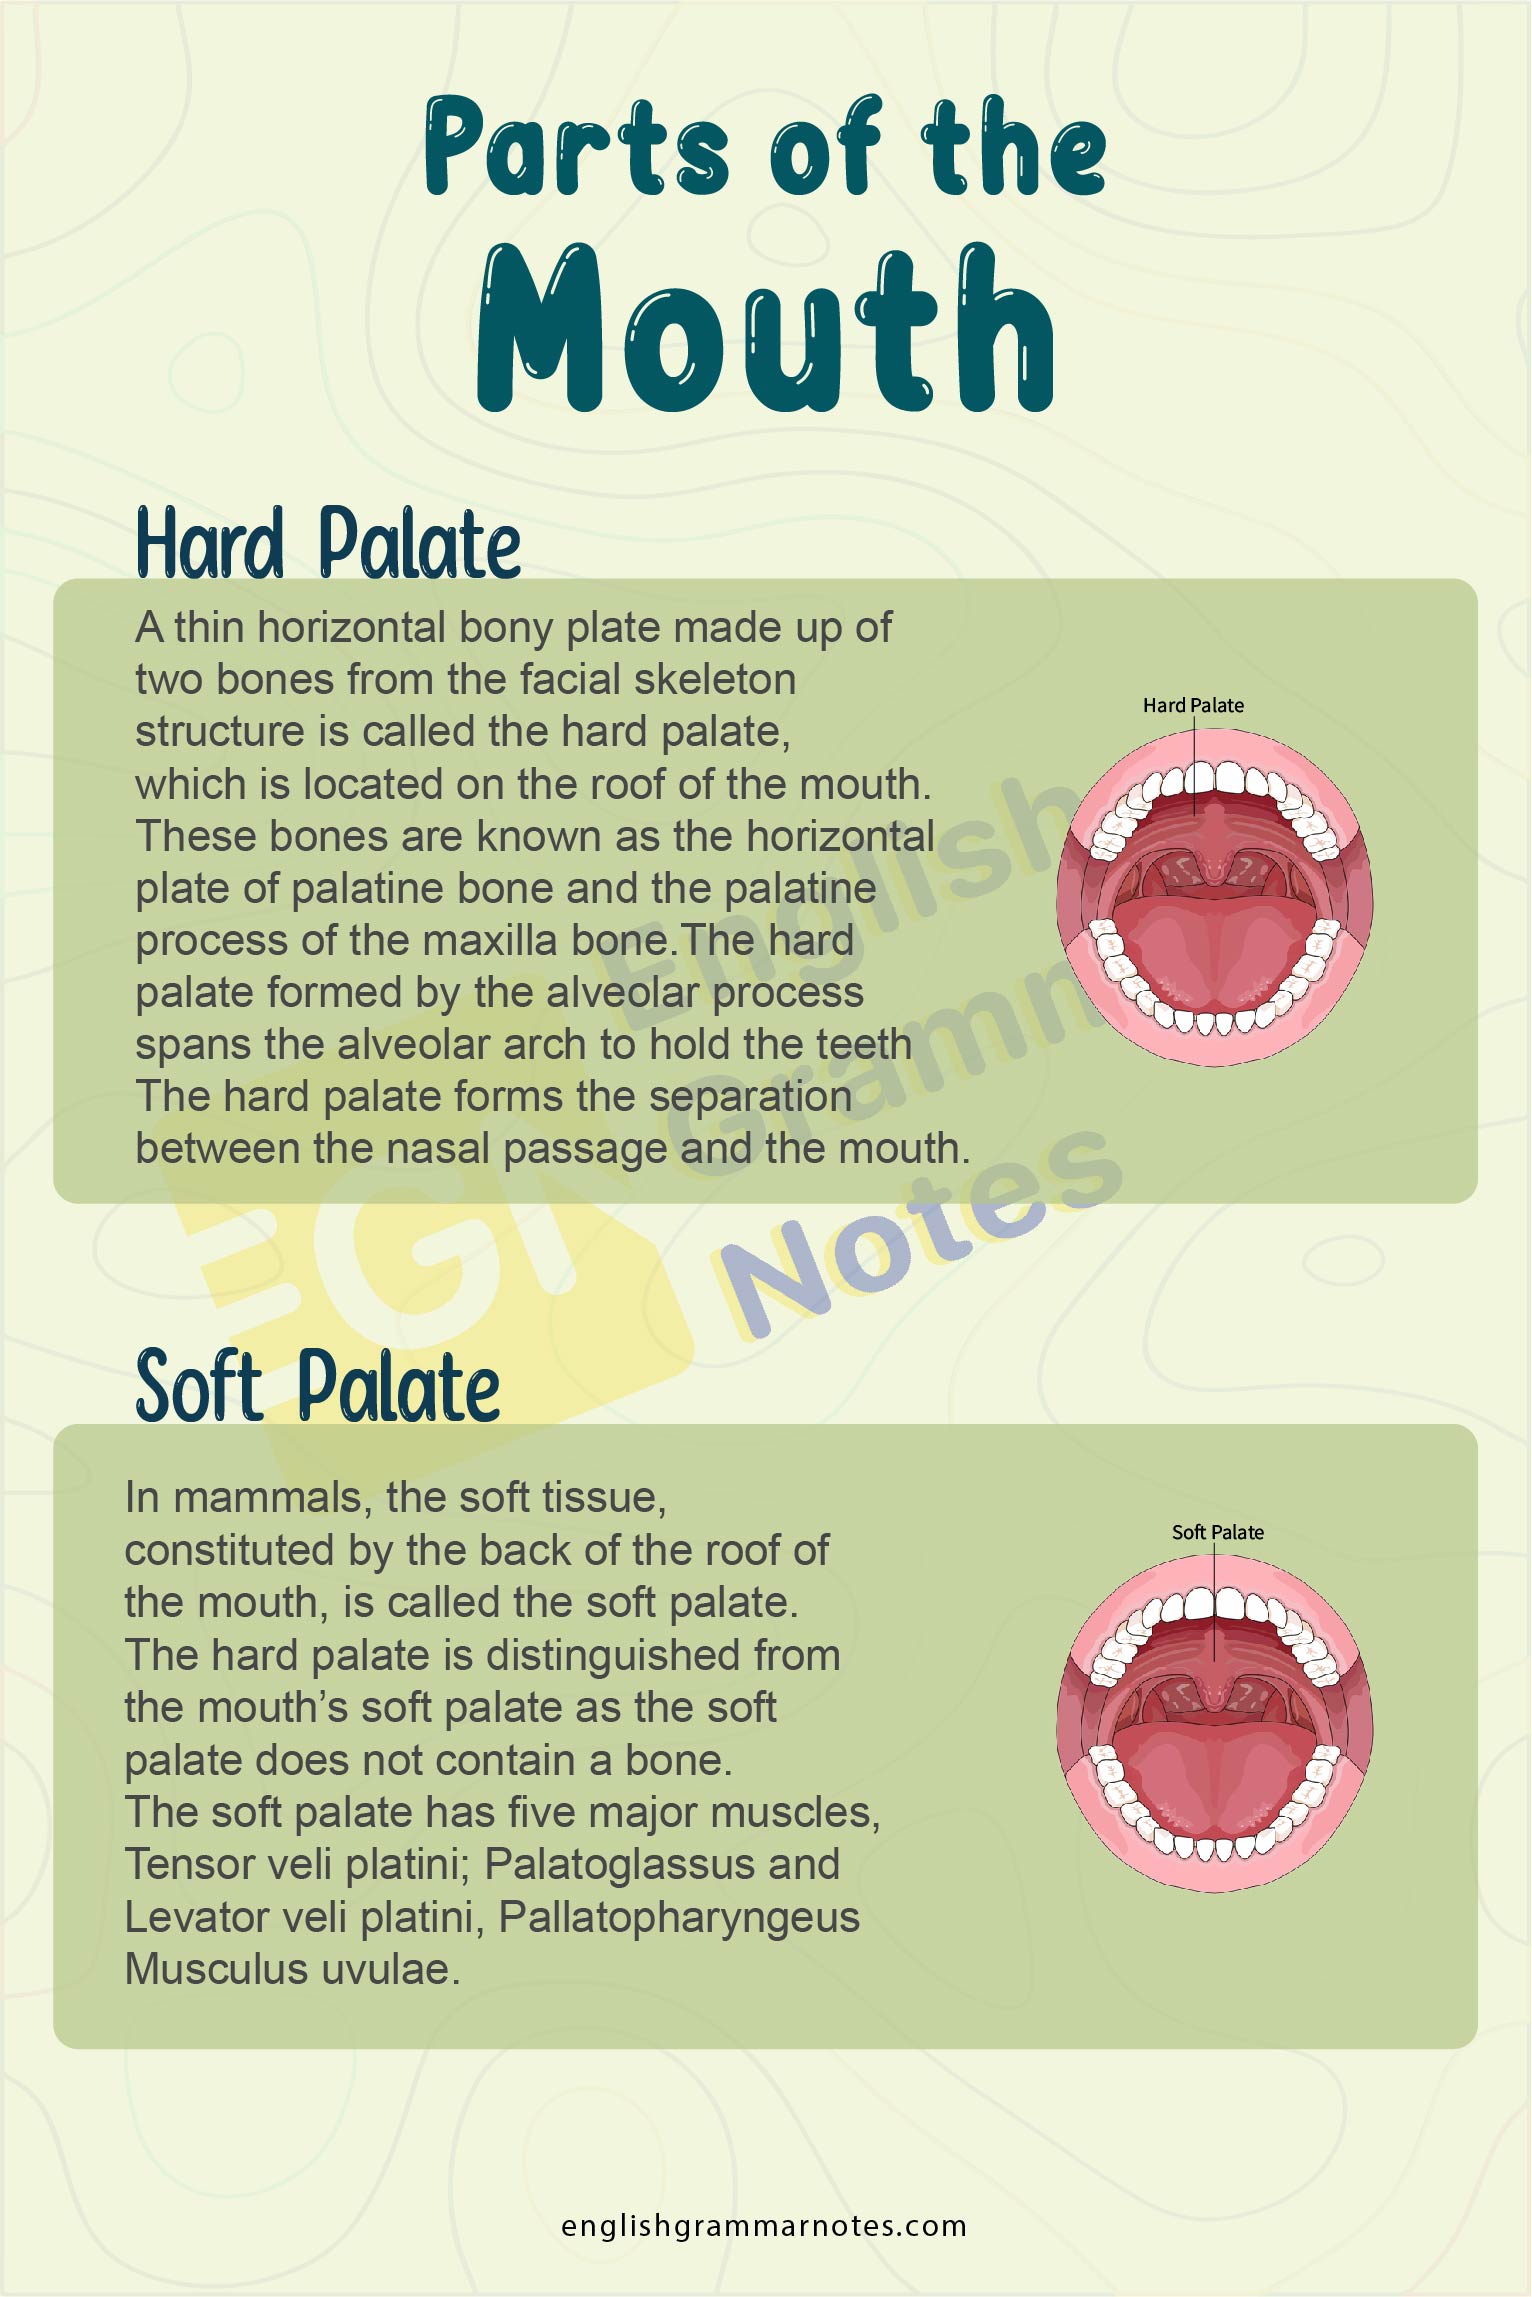 Parts of Mouth 2